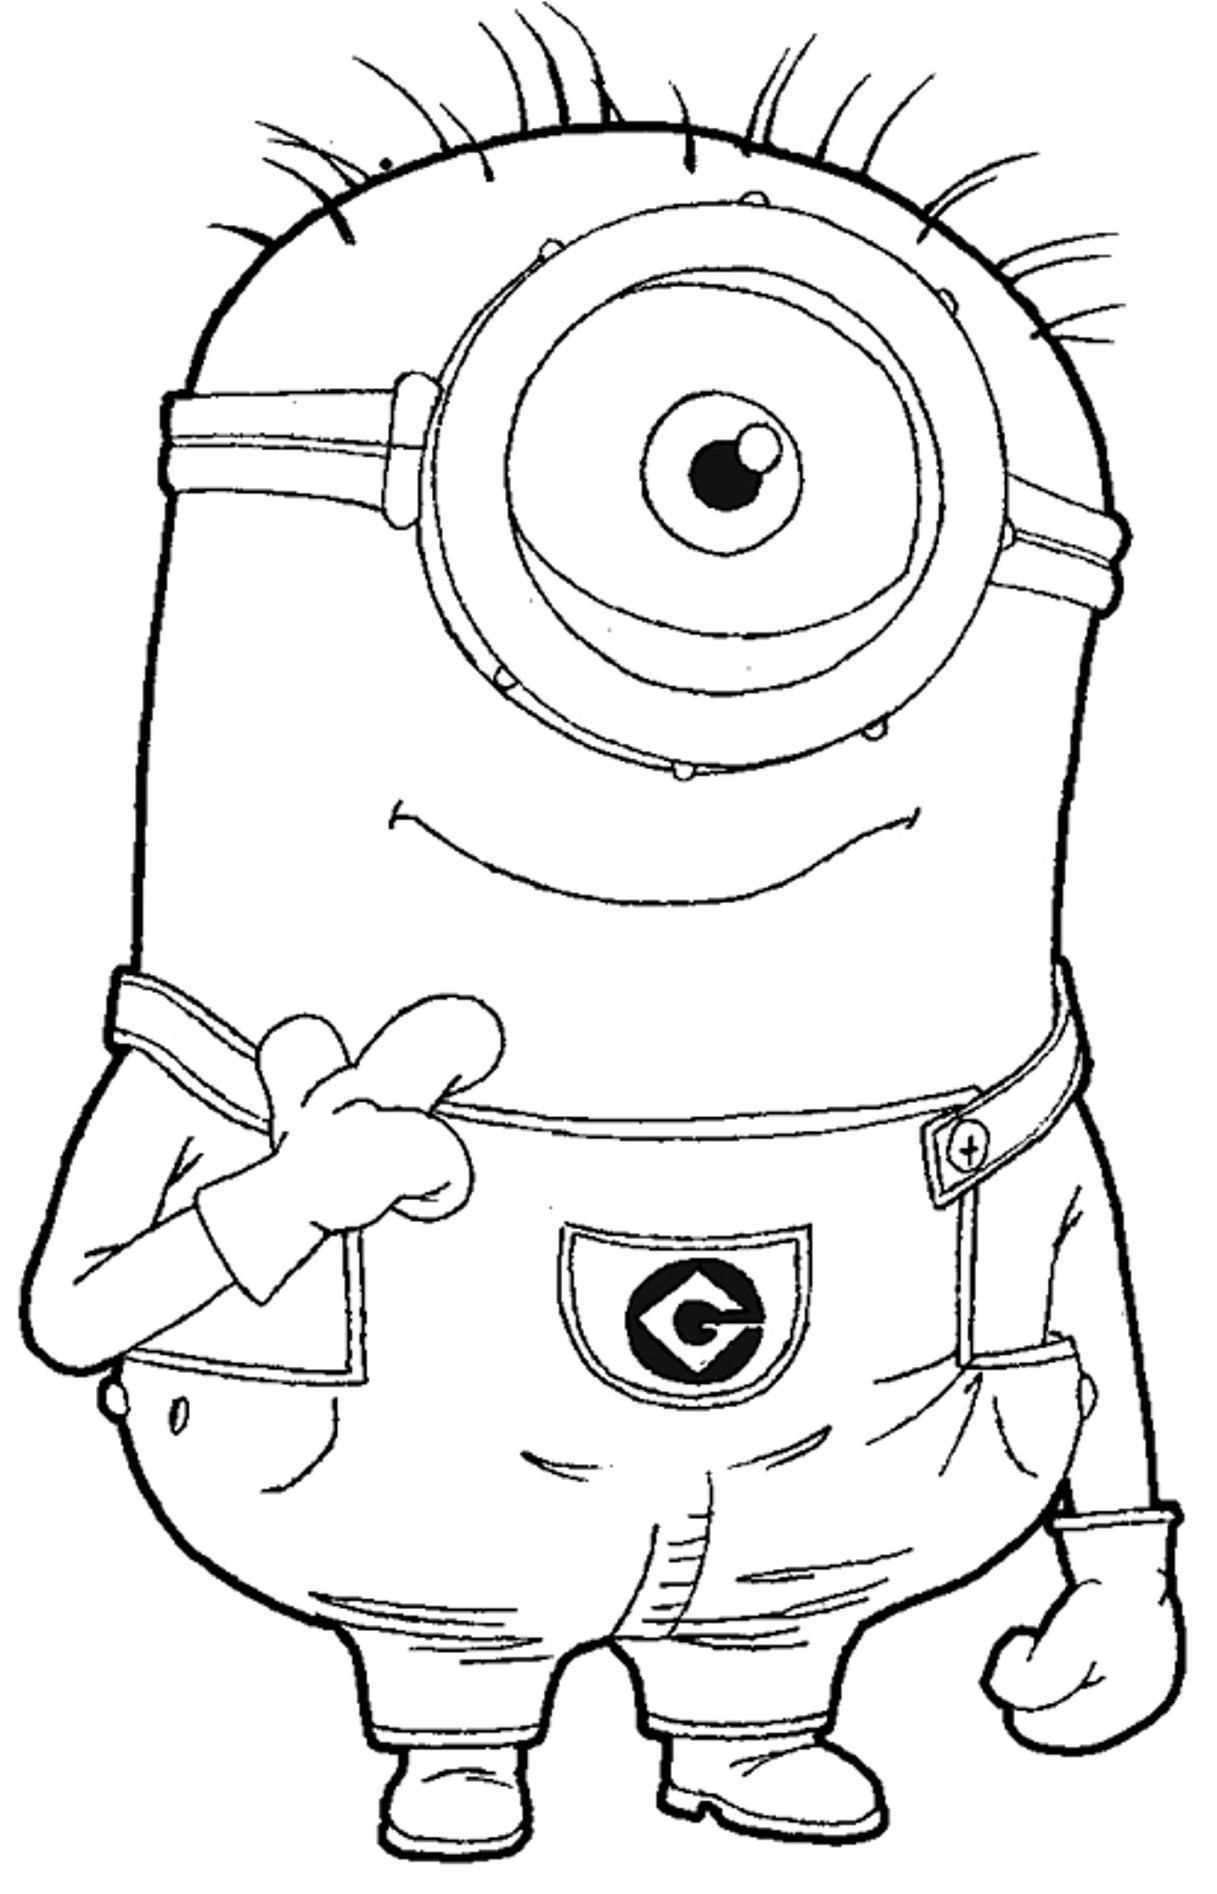 Minion Coloring Pages
 Free Minion Coloring Pages Bestofcoloring